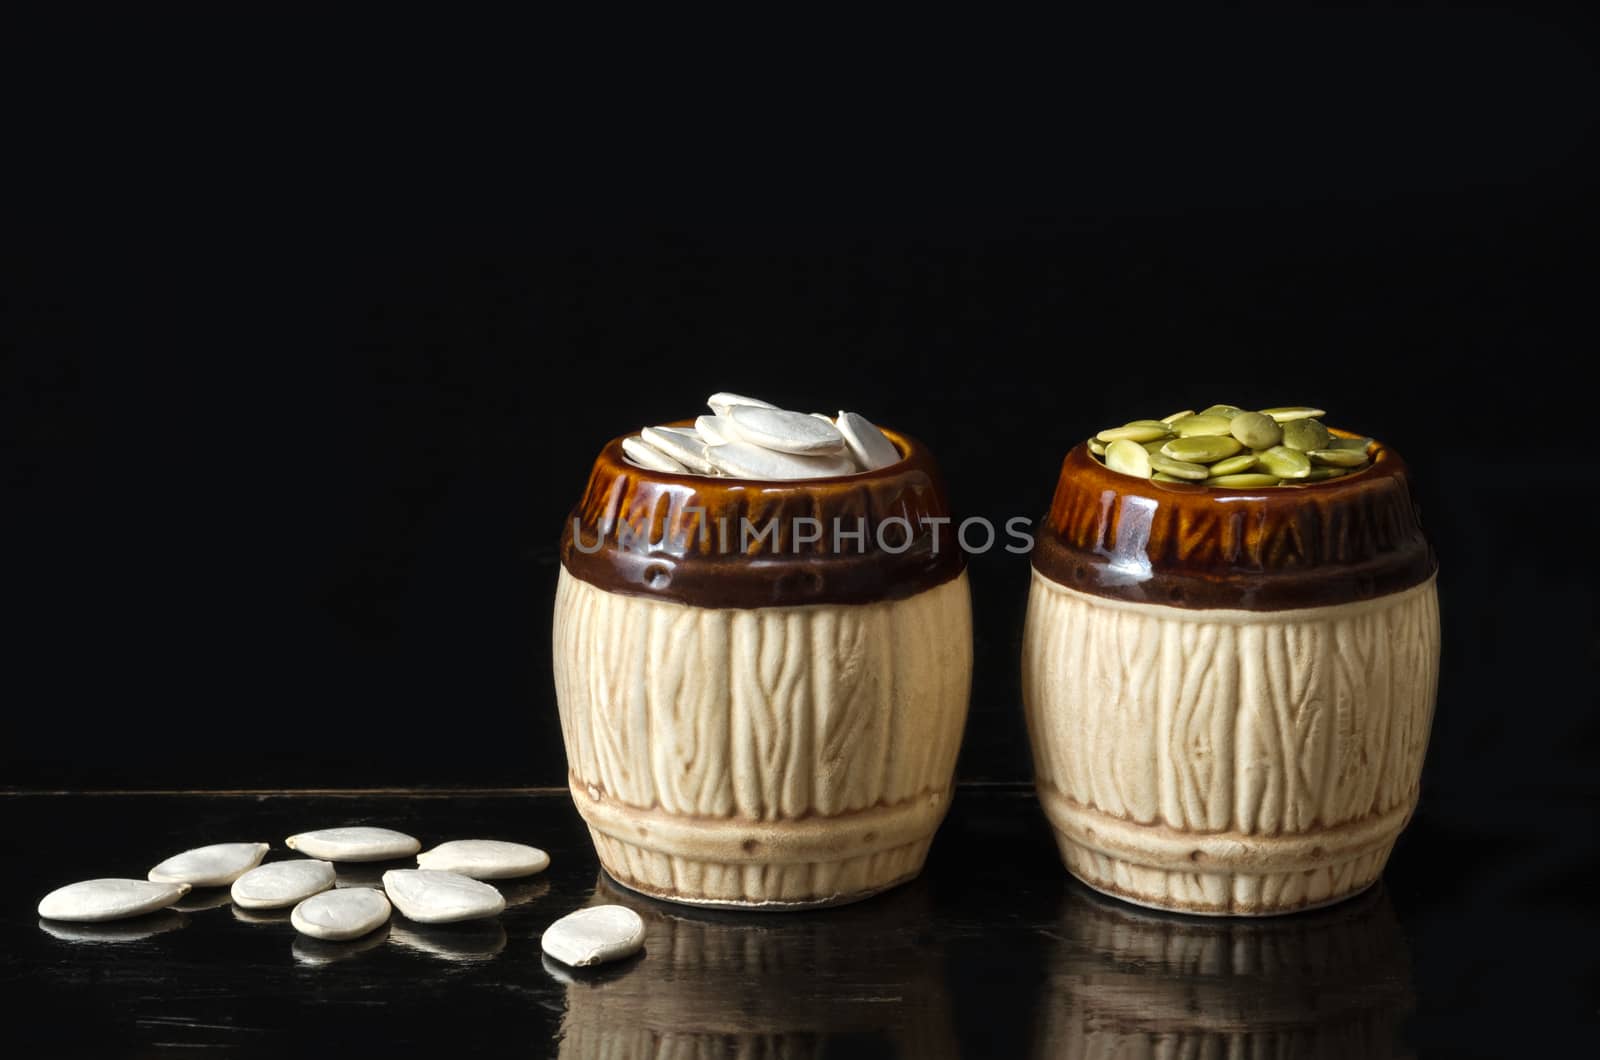 Pumpkin seeds in a ceramic bowl on a black background and a vintage black lacquered surface